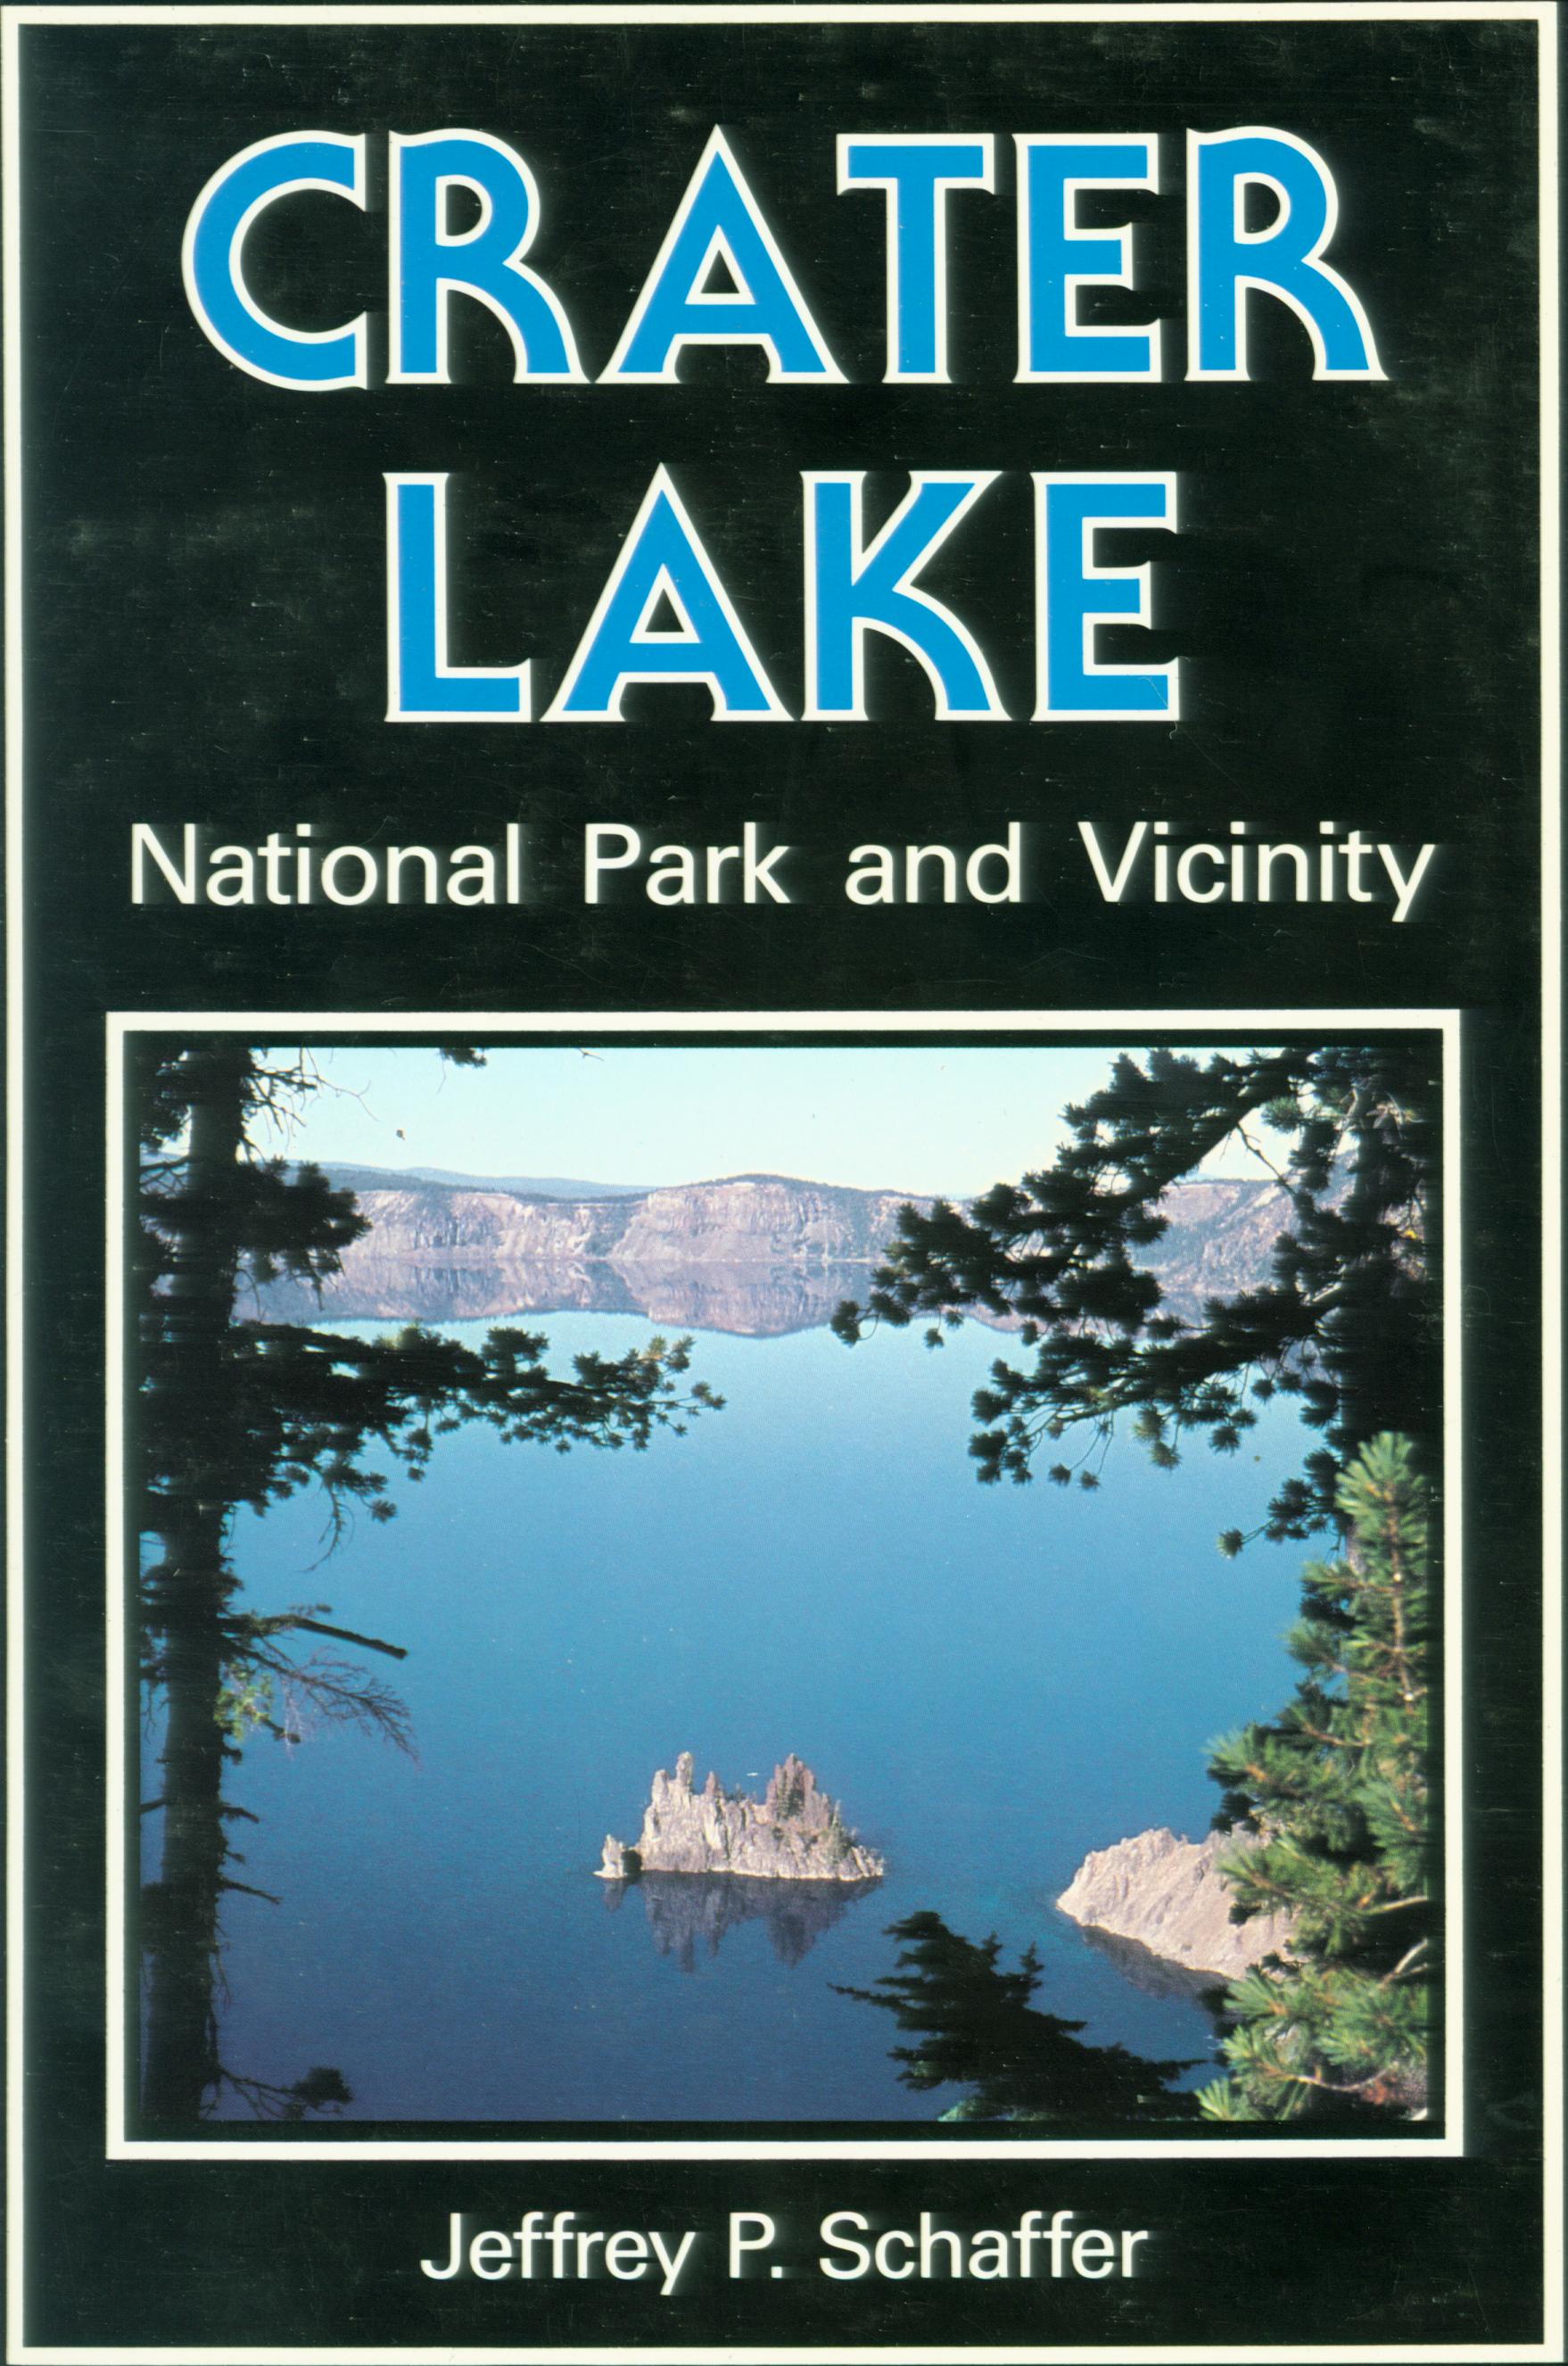 CRATER LAKE NATIONAL PARK AND VICINITY (OR).